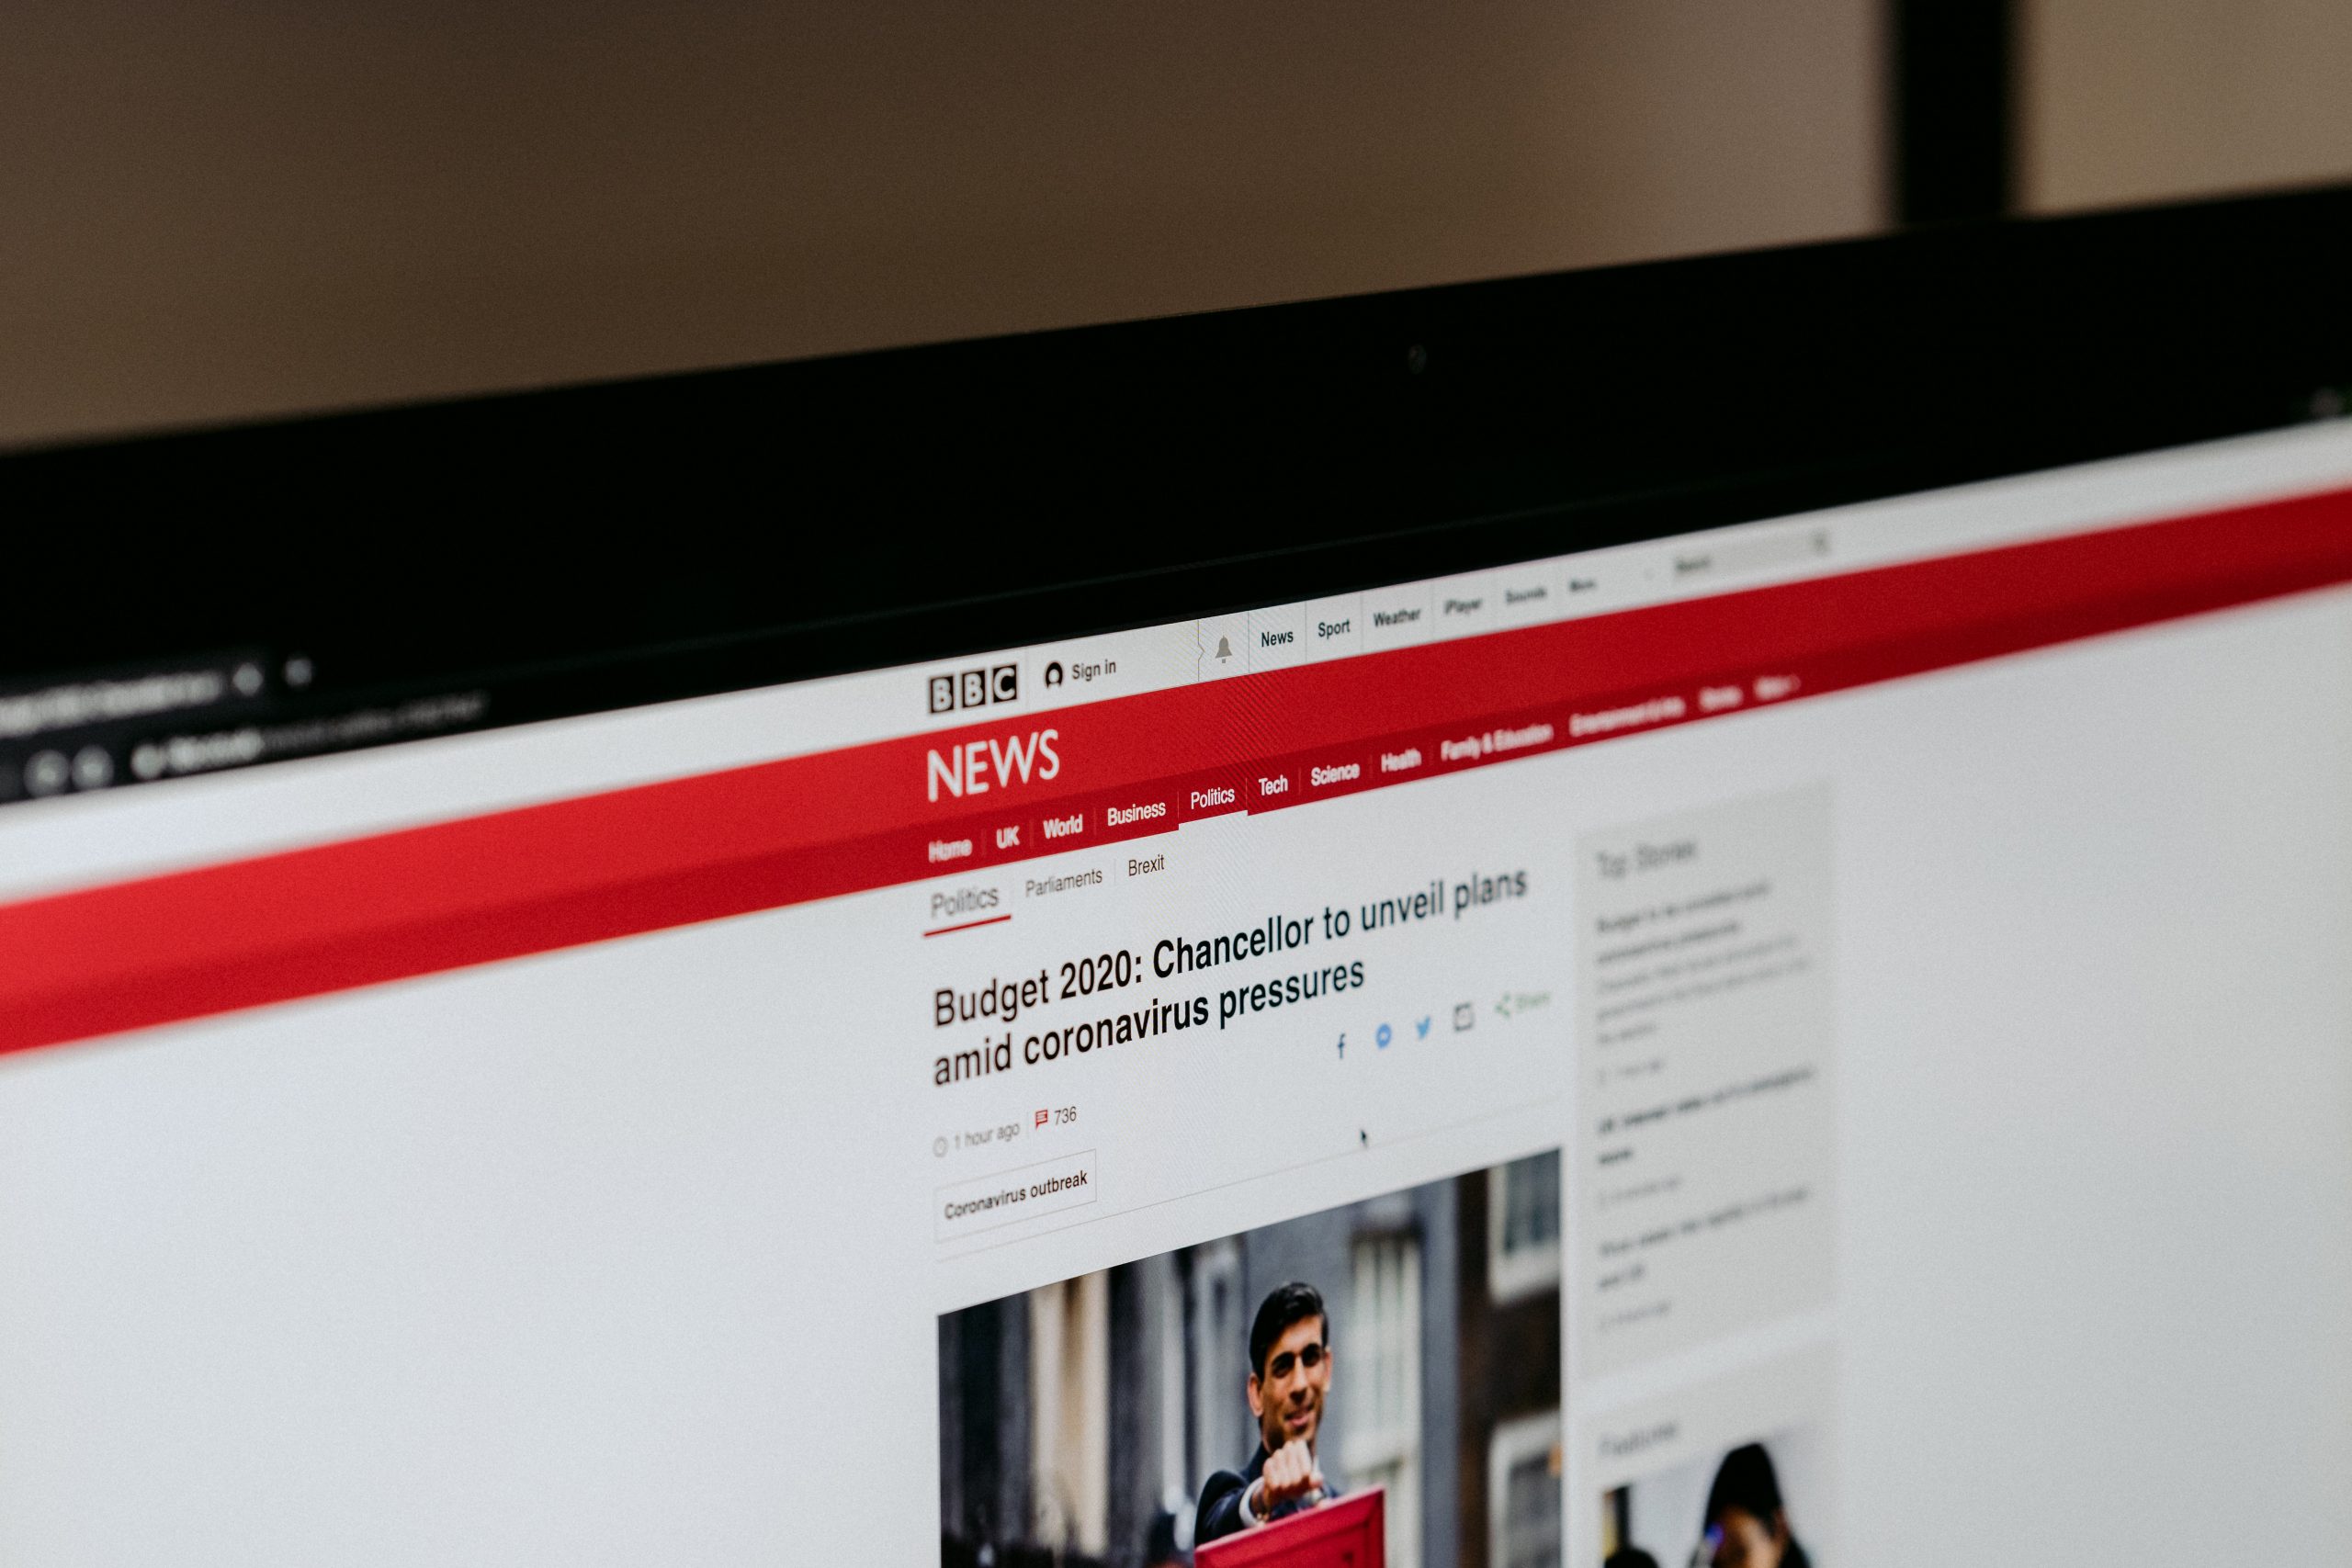 A photo shows a laptop screen with a news story on the BBC website. The headline is highlighting the release of the budge amidst the pandemic